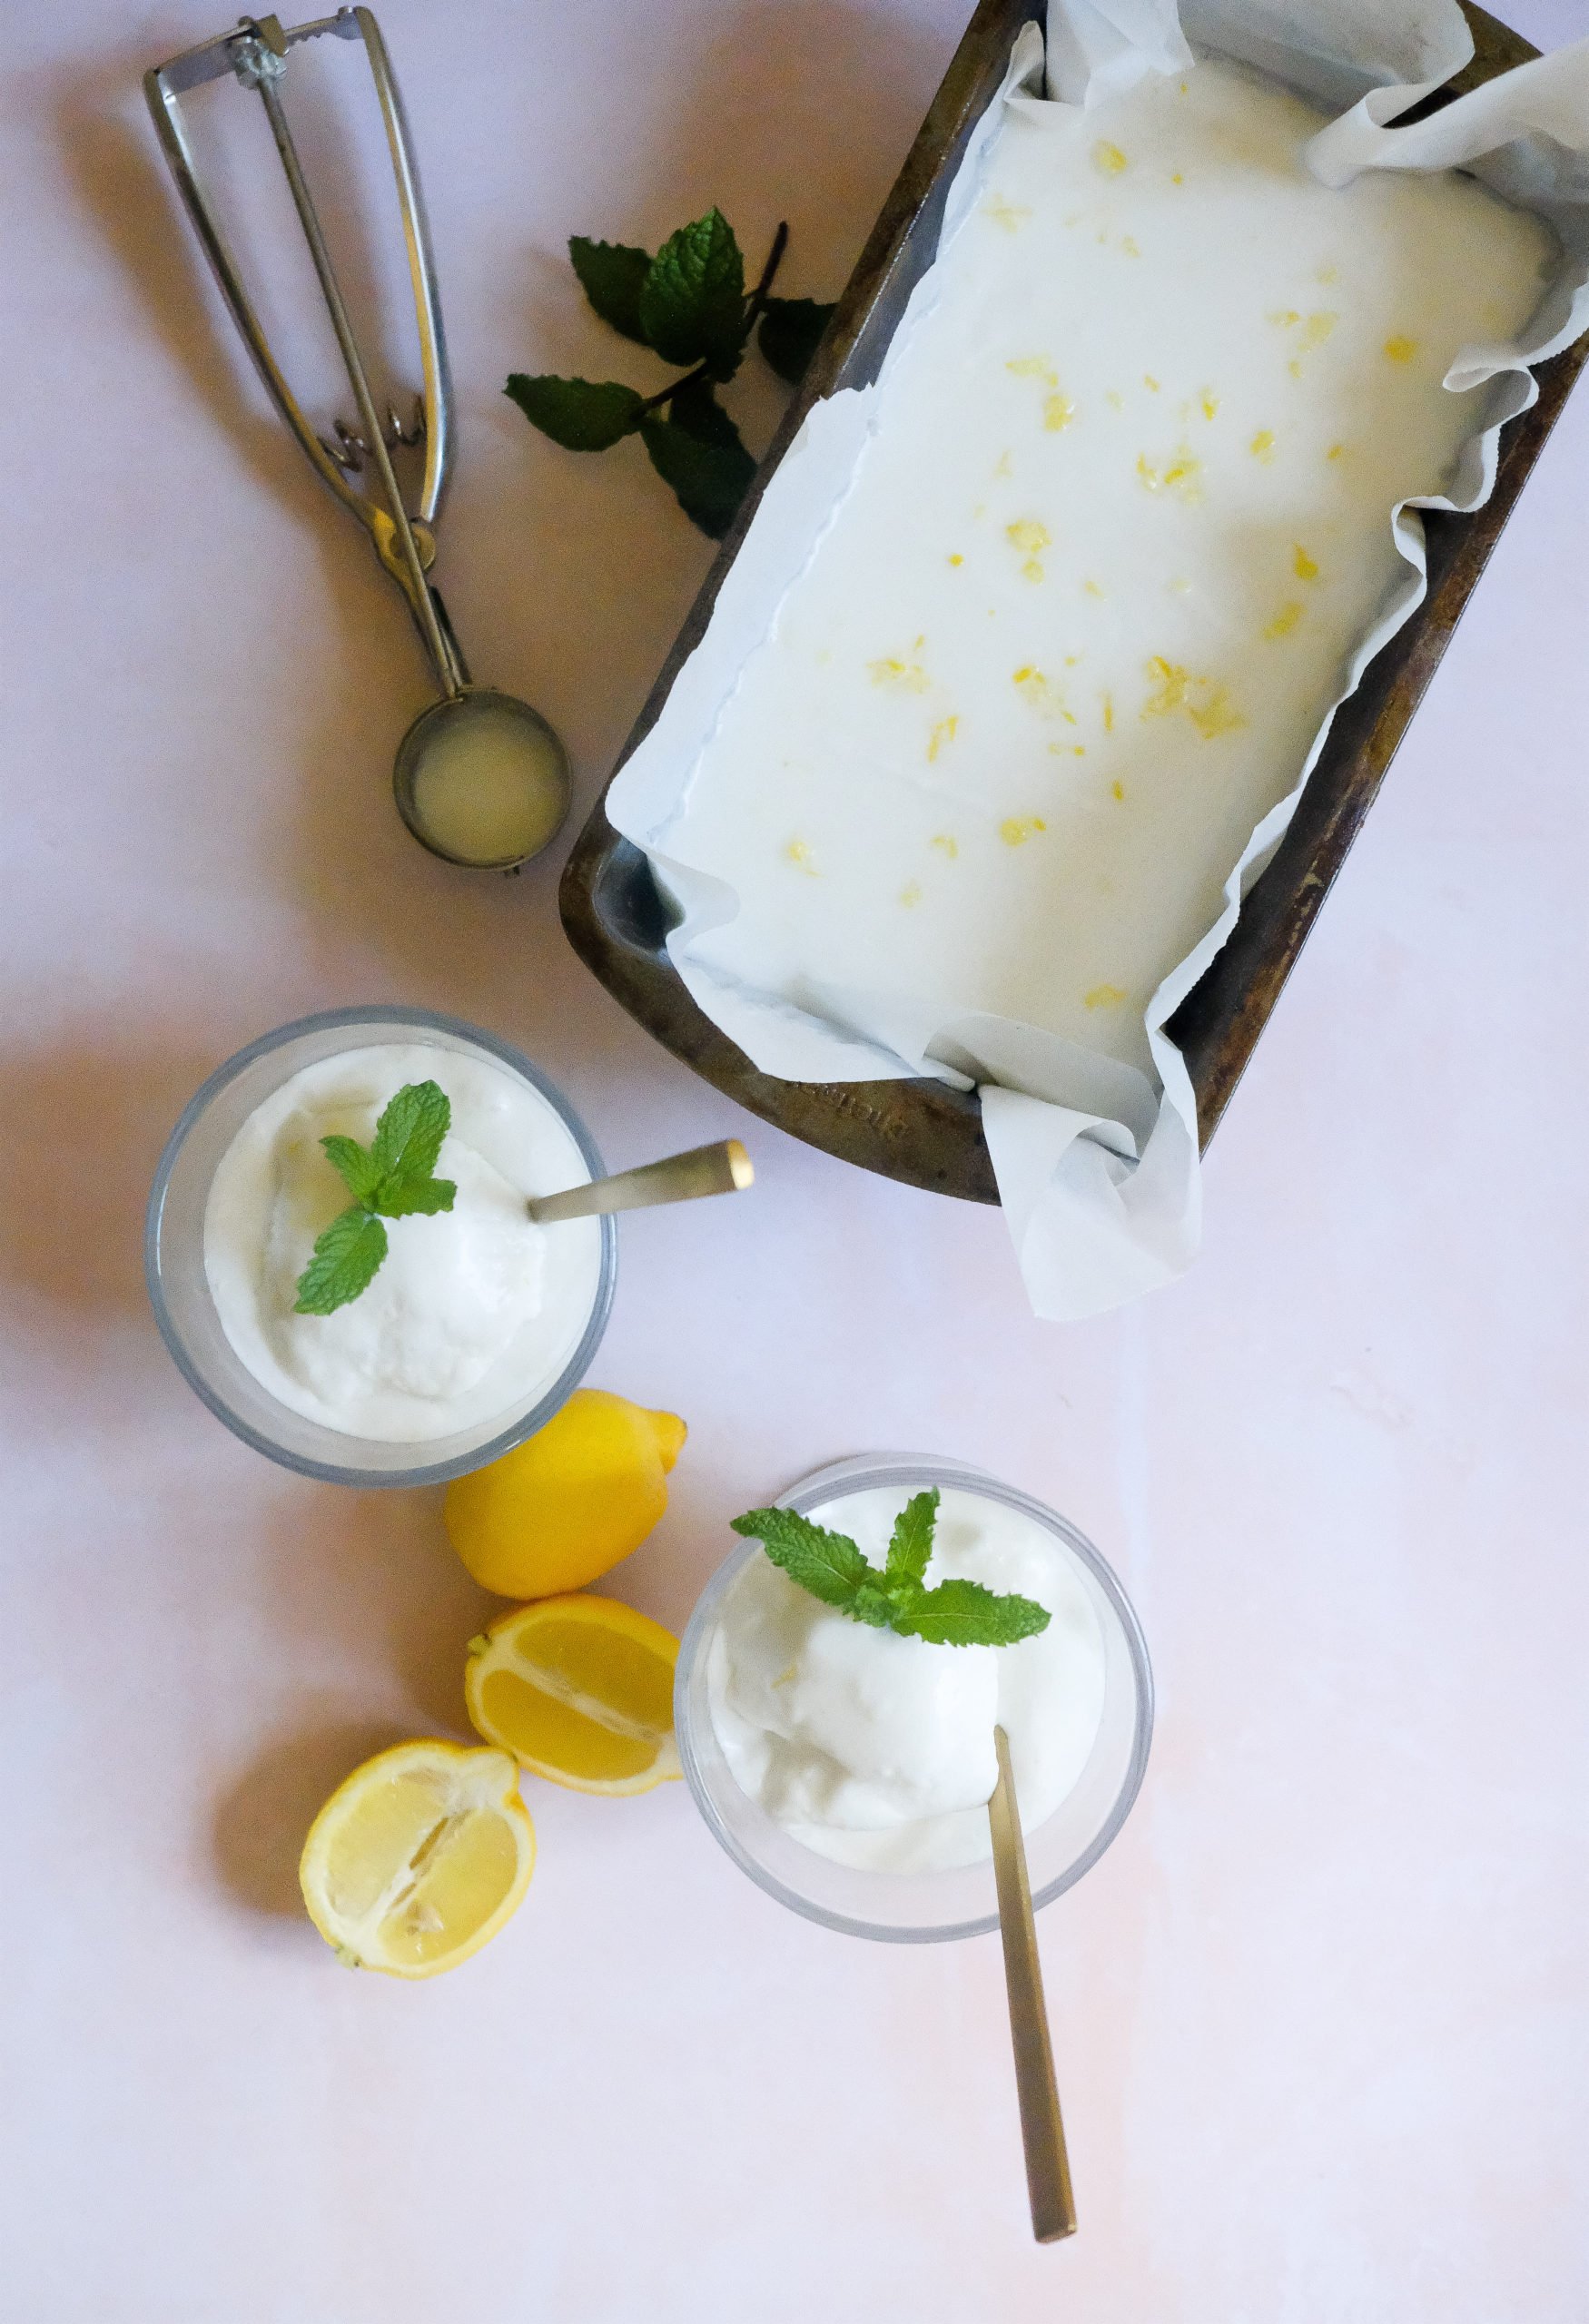 Chocolate & Lace shares her recipe for homemade Coconut Lemon Sorbet